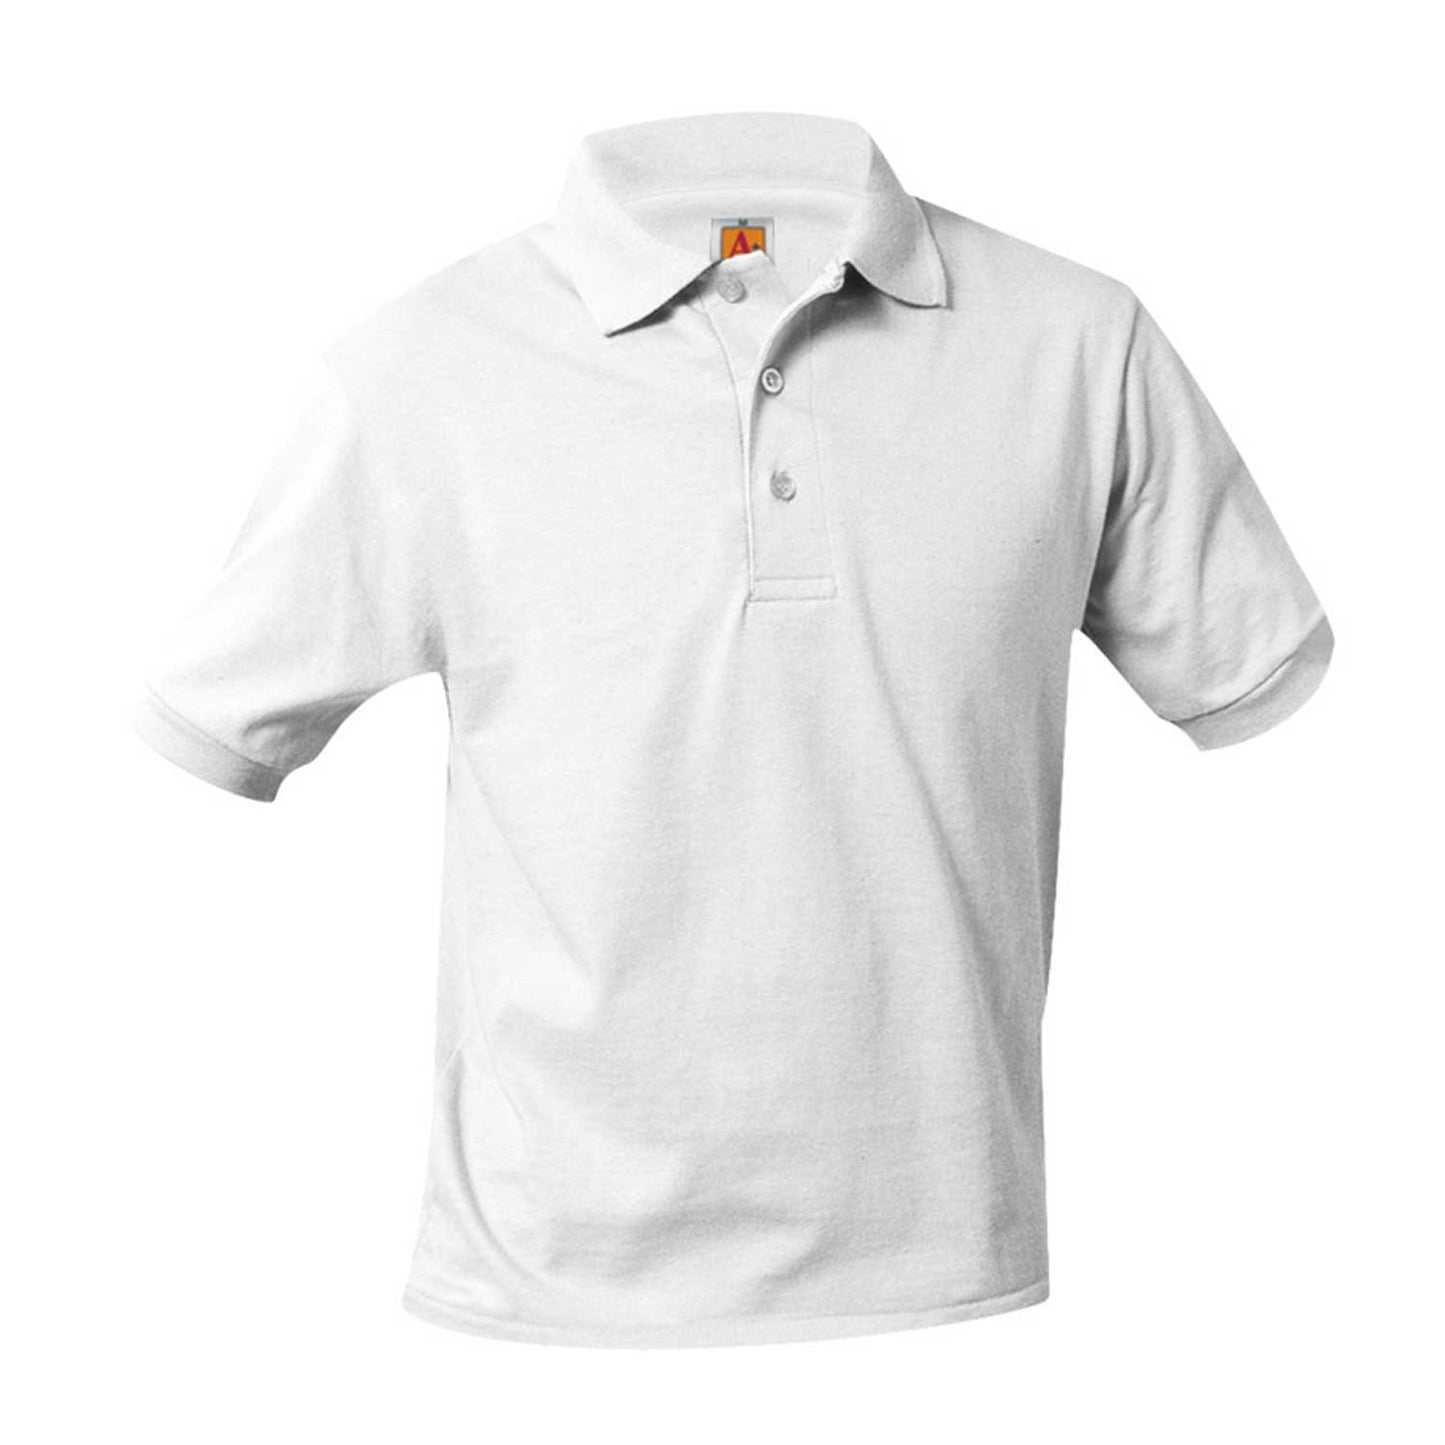 TCPS Jersey Unisex Polo